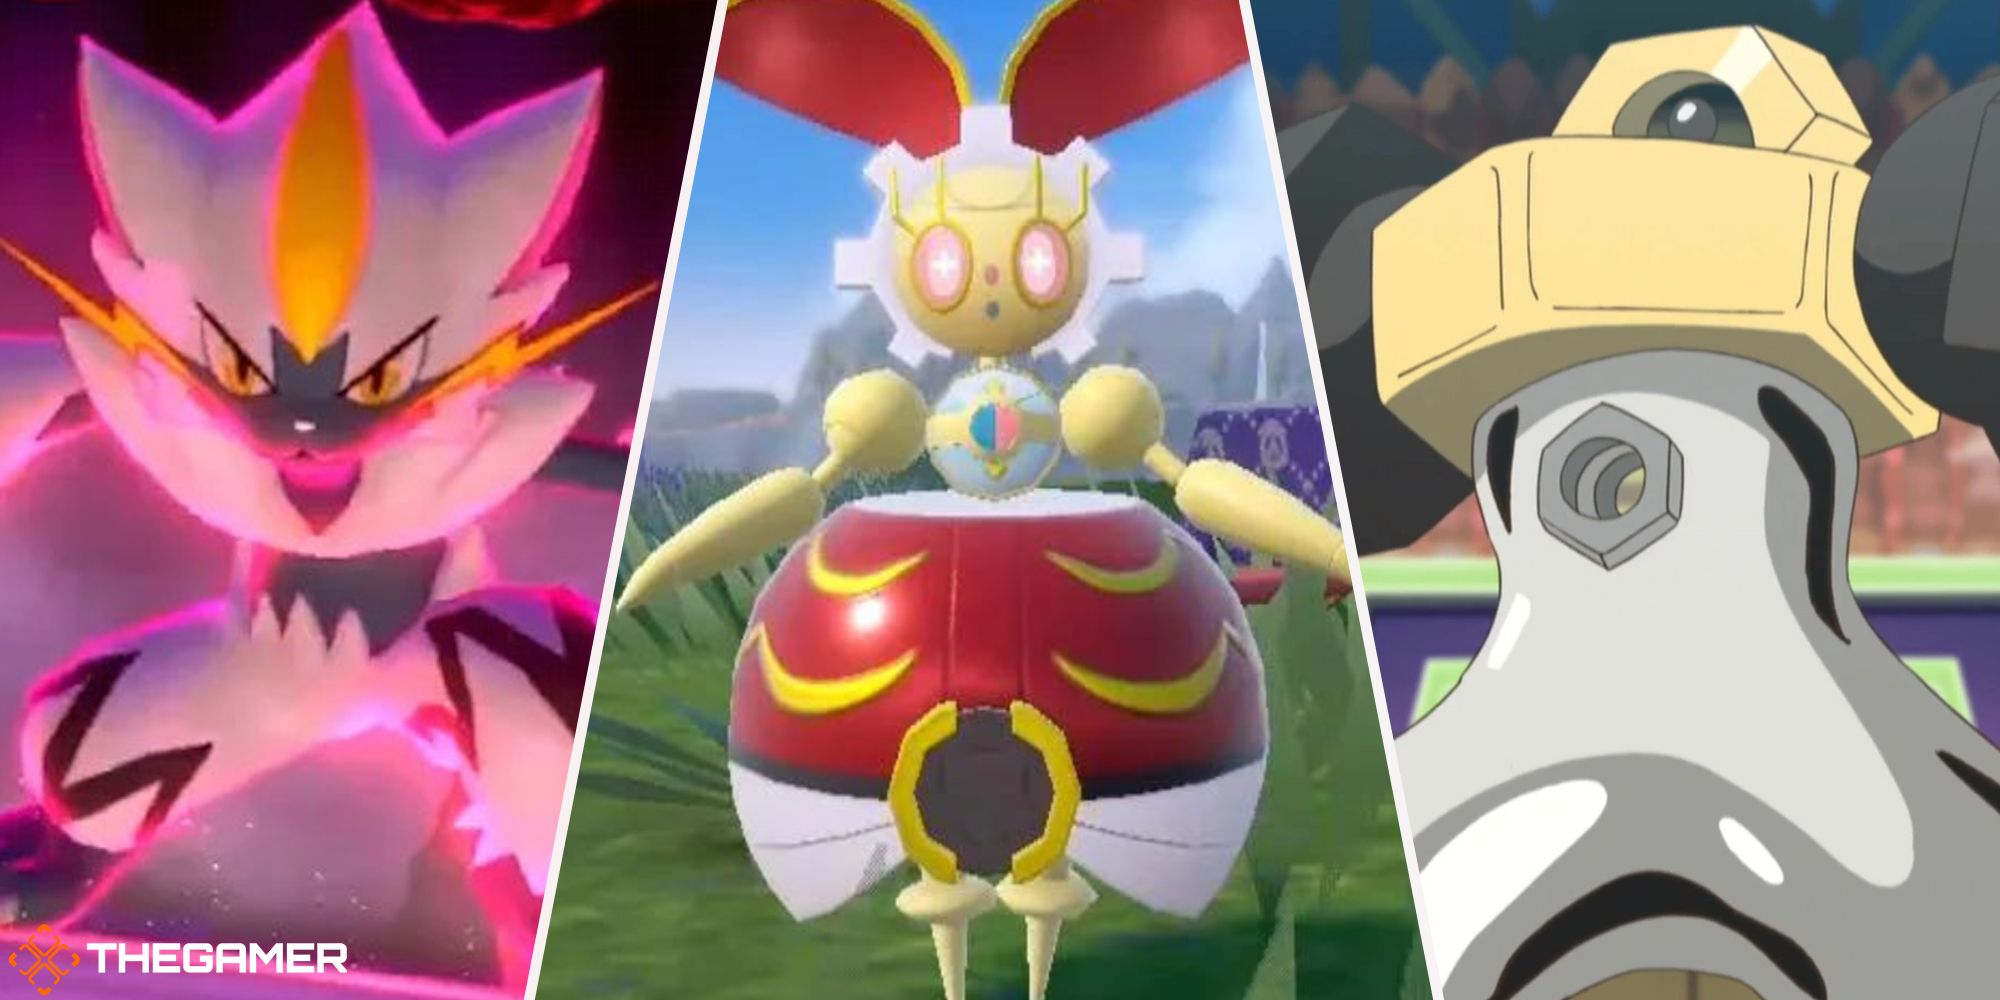 💯✨🕵👀 ENGEL GO 🚨📱 💯✨ on X: #PokémonGO integration with #PokémonHOME  has been announced for release later this year, along with an event  including #Meltan. You'll be able to activate the Mystery